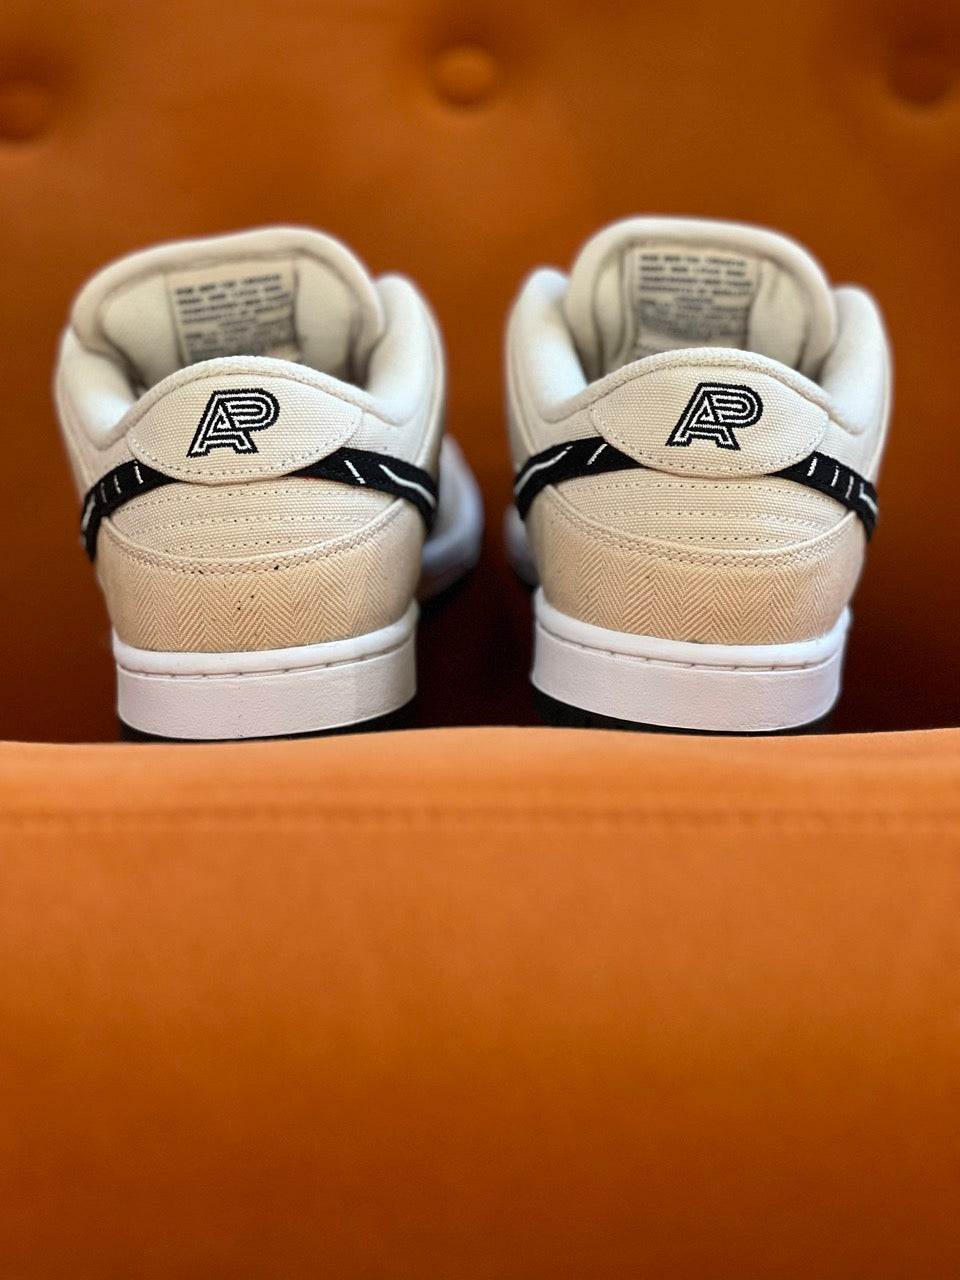 Image of the back heels of the Nike SB A&P Dunk Low sitting on an orange couch